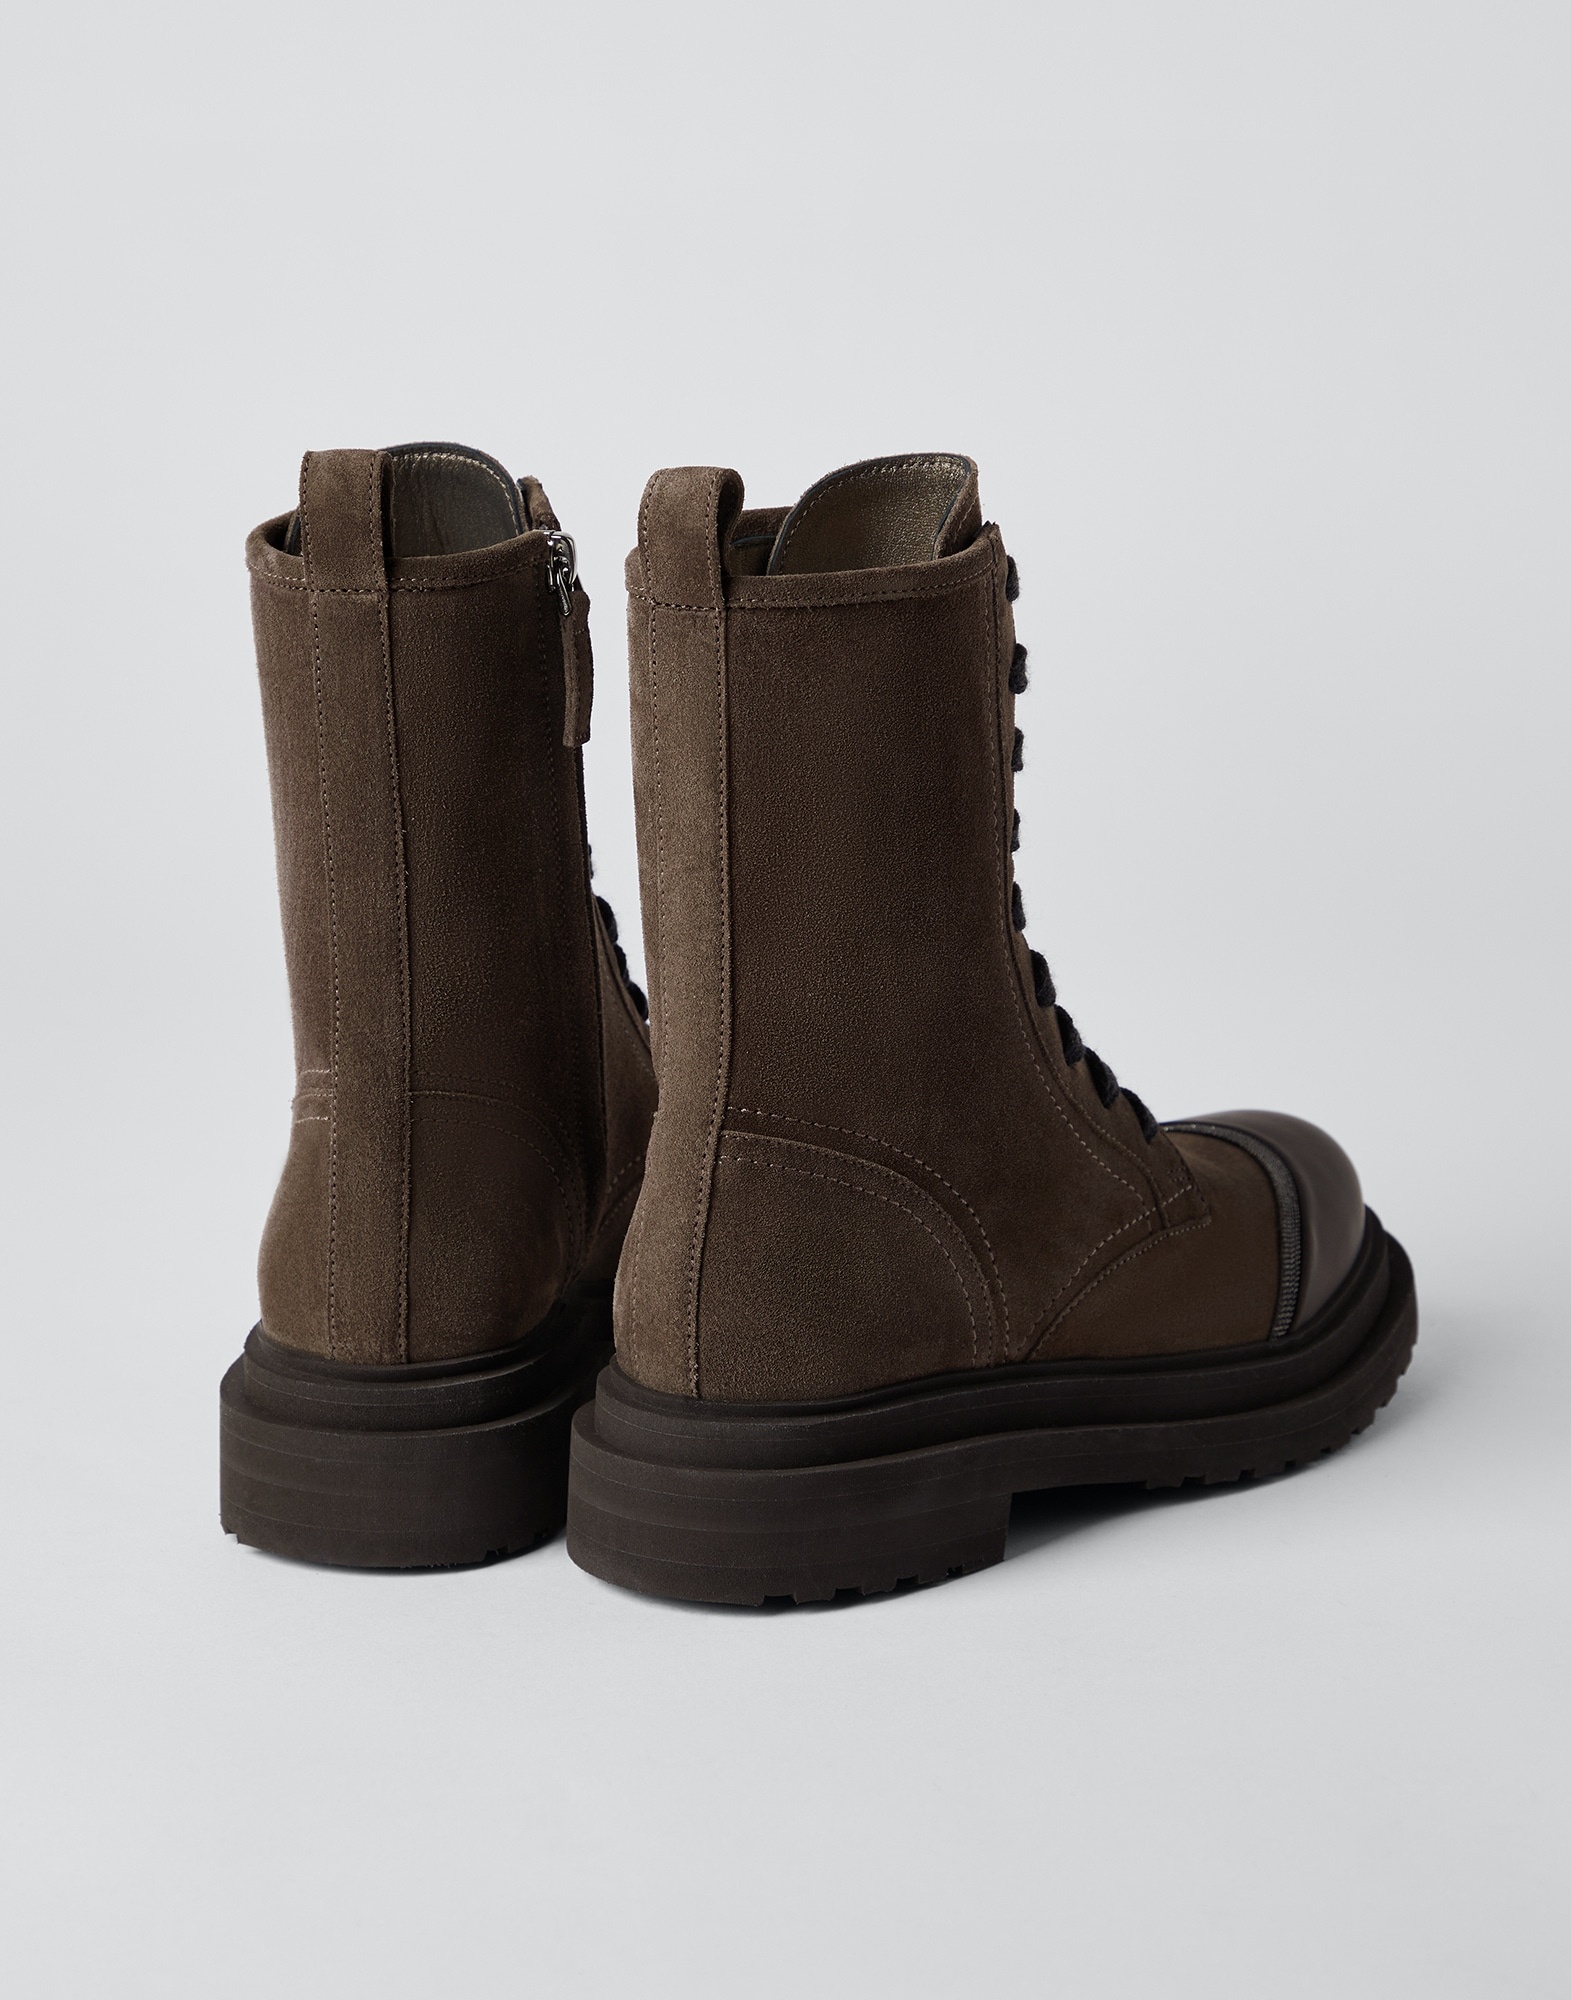 Suede and calfskin boots with monili - 3